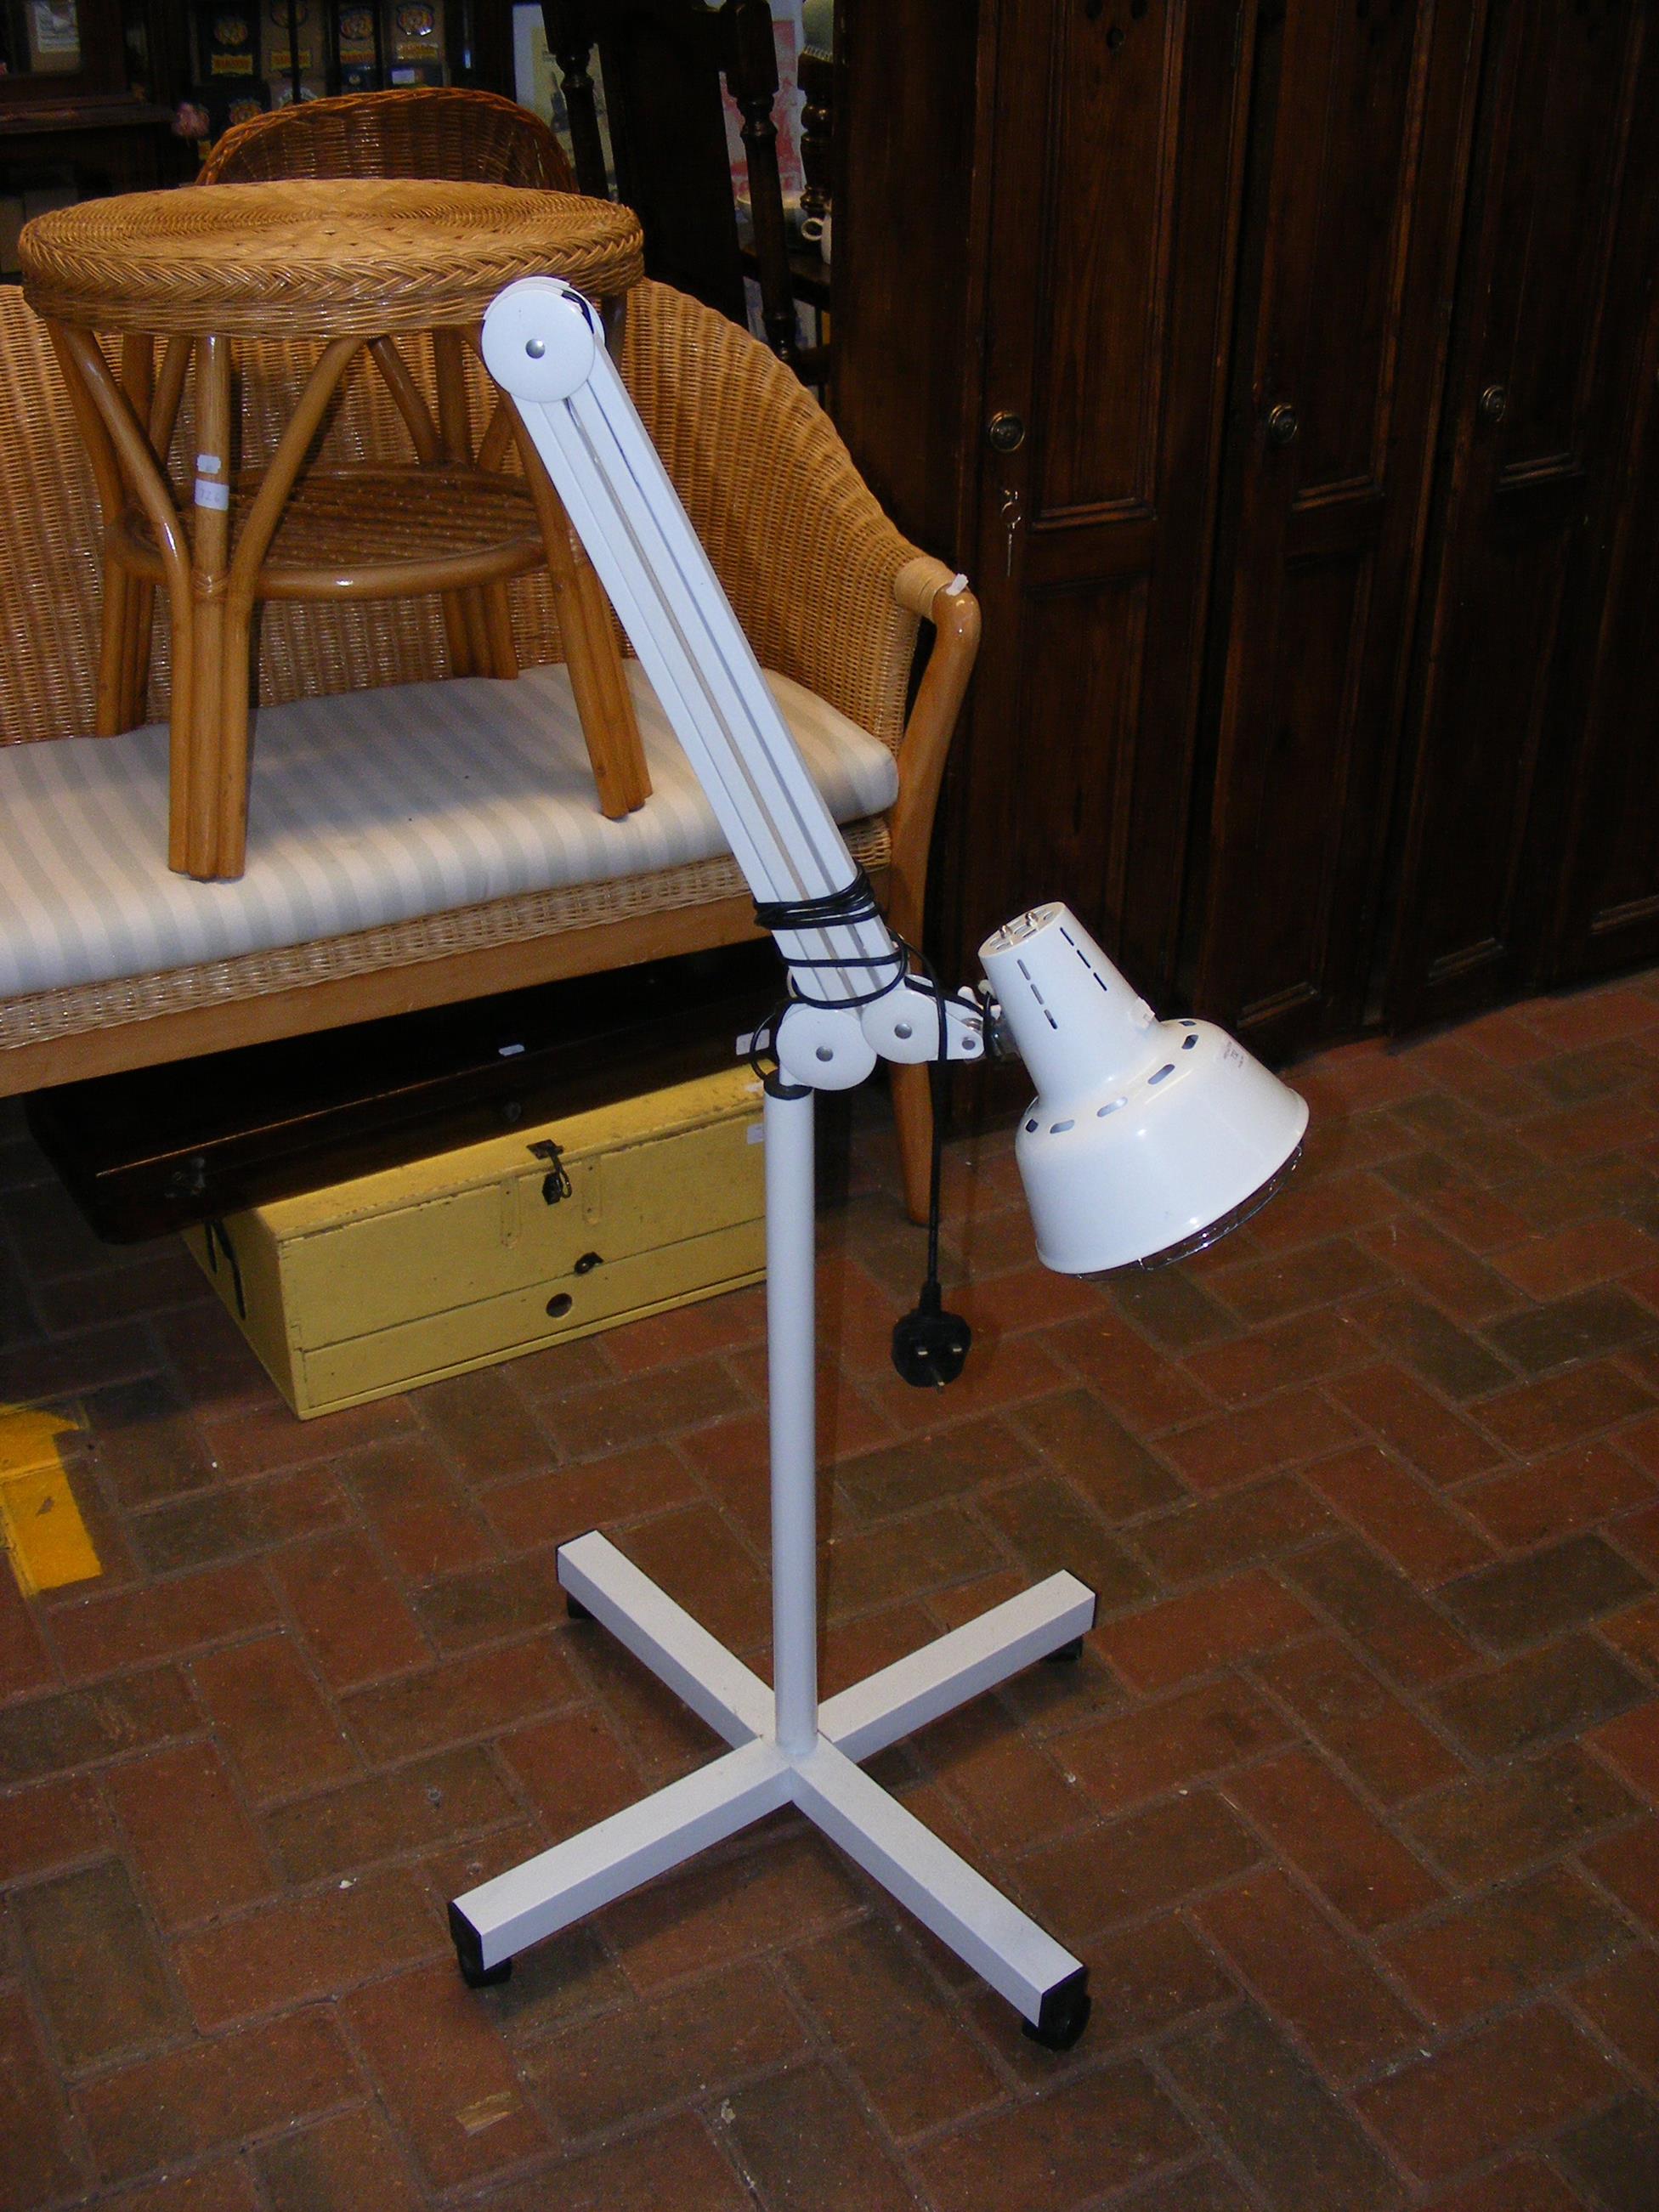 An anglepoise style lamp on stand with castors